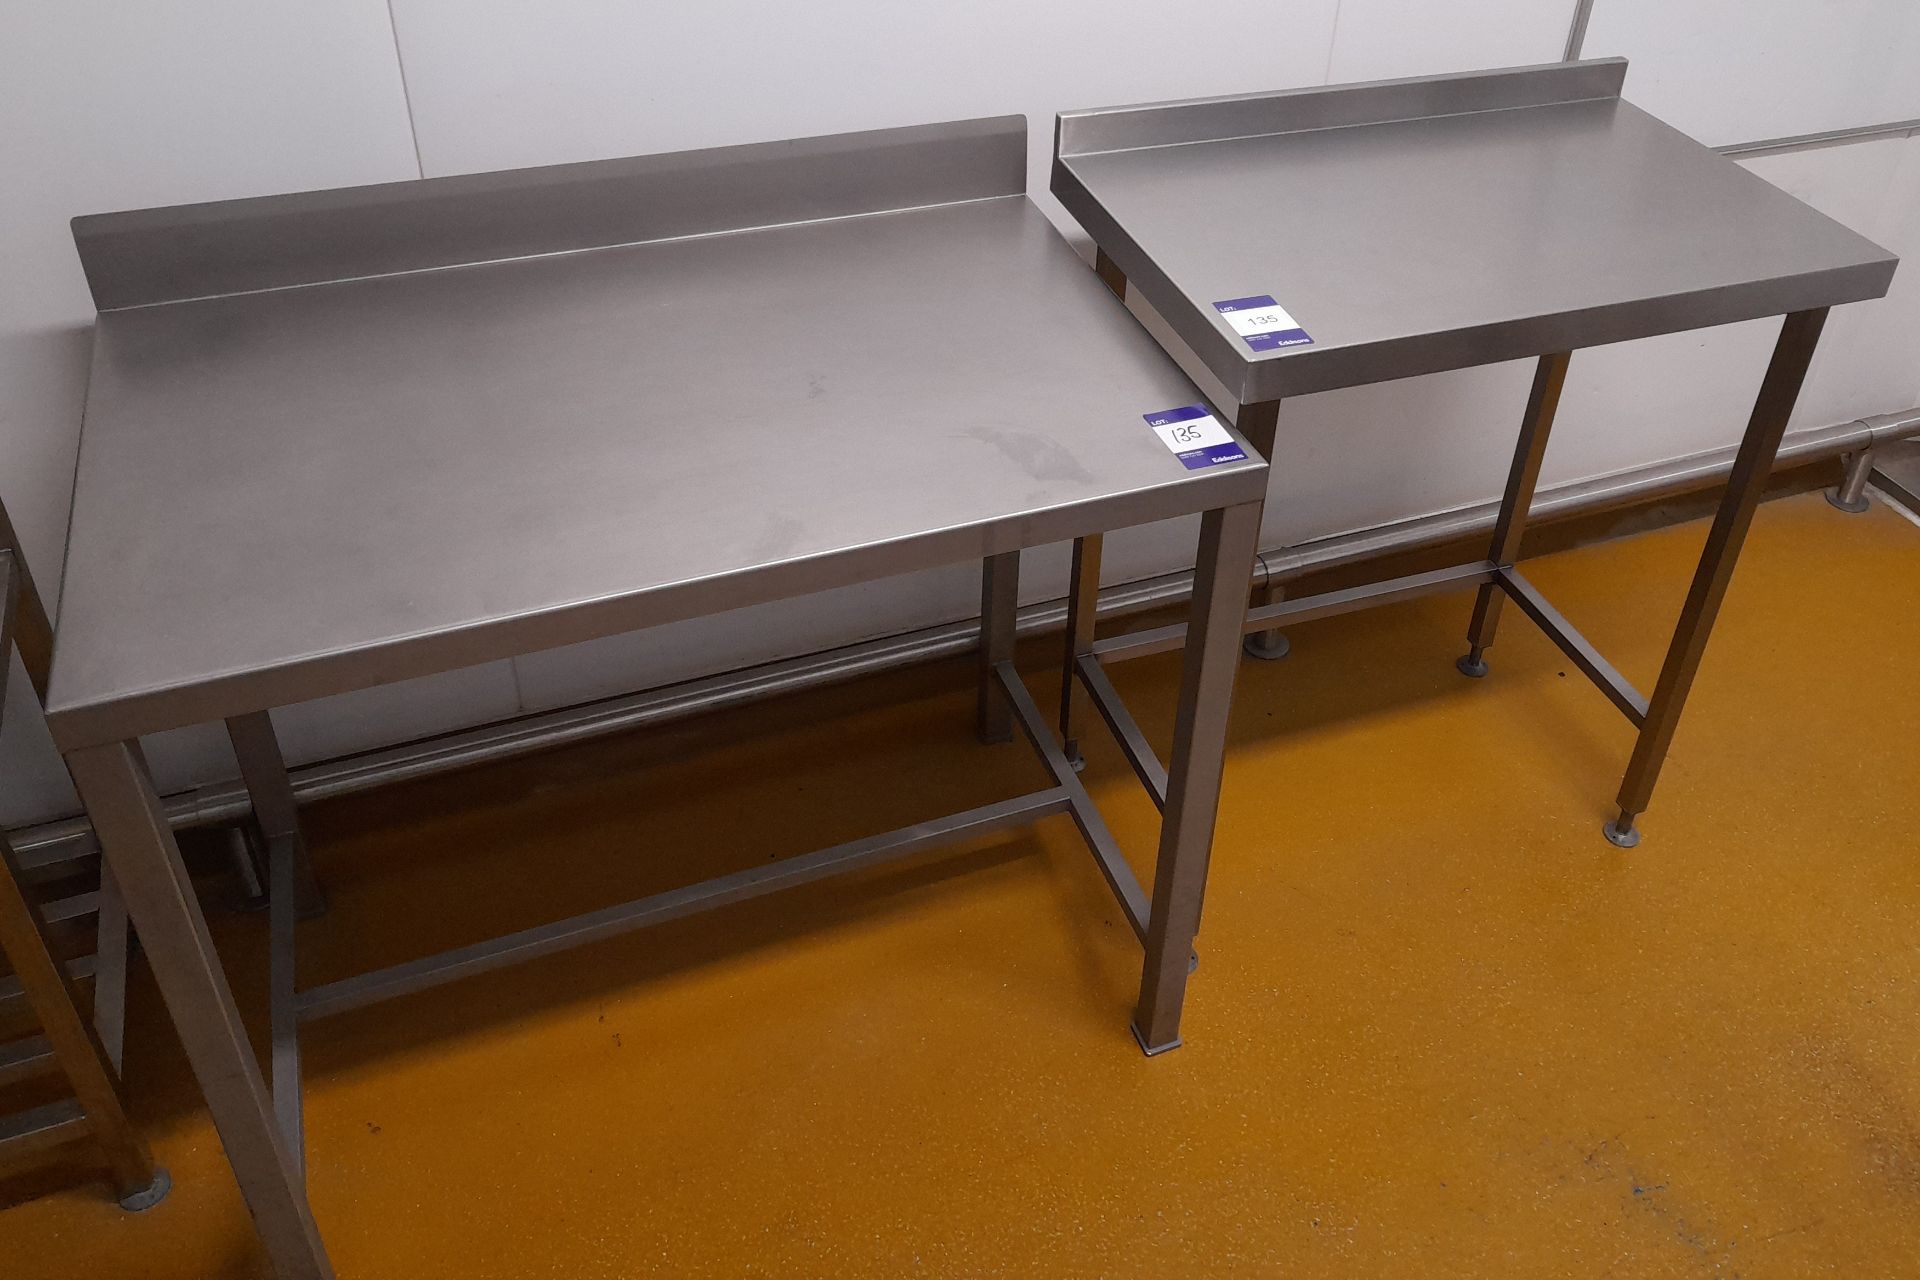 2 x Stainless Steel prep tables (800 x 500, 1000 x 620)